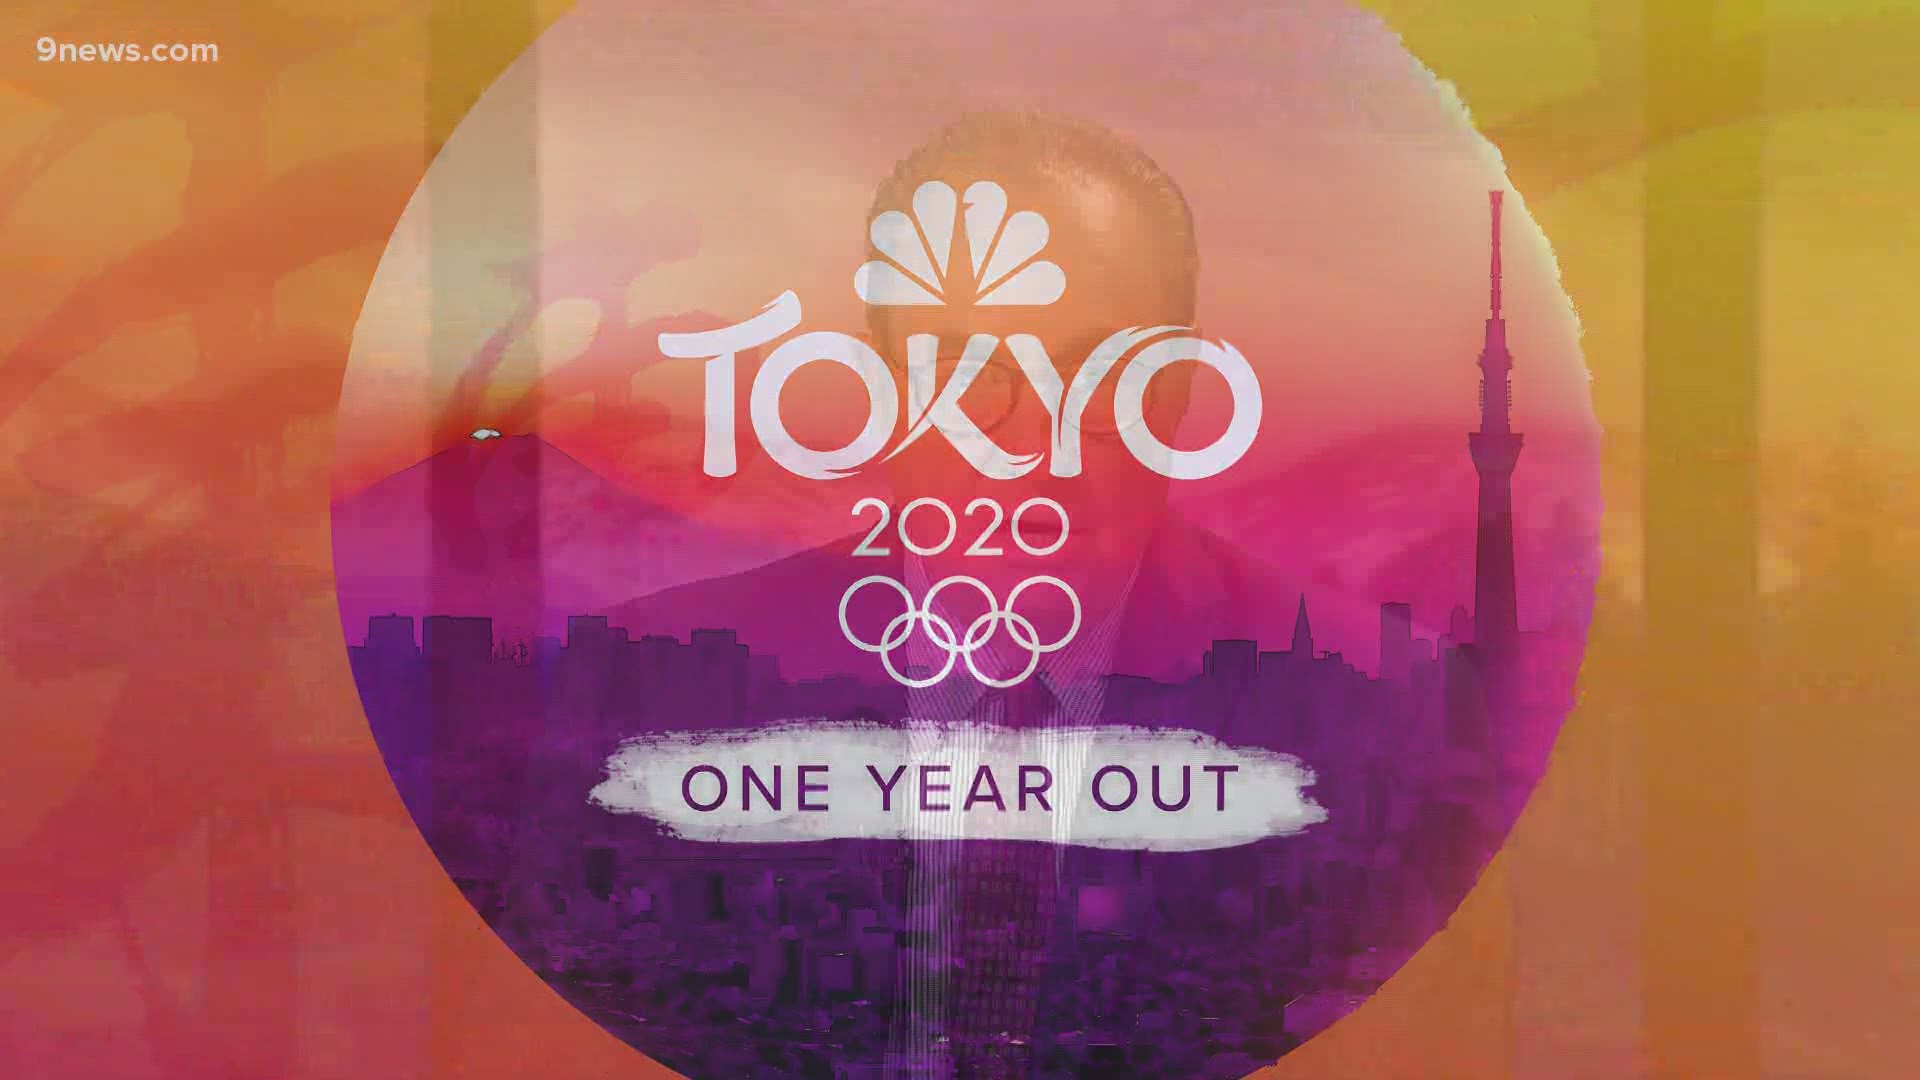 NBC Sports analyst Mike Tirico talks about the Tokyo Olympics on what have been the opening day. The games were rescheduled to 2021 due to COVID-19.